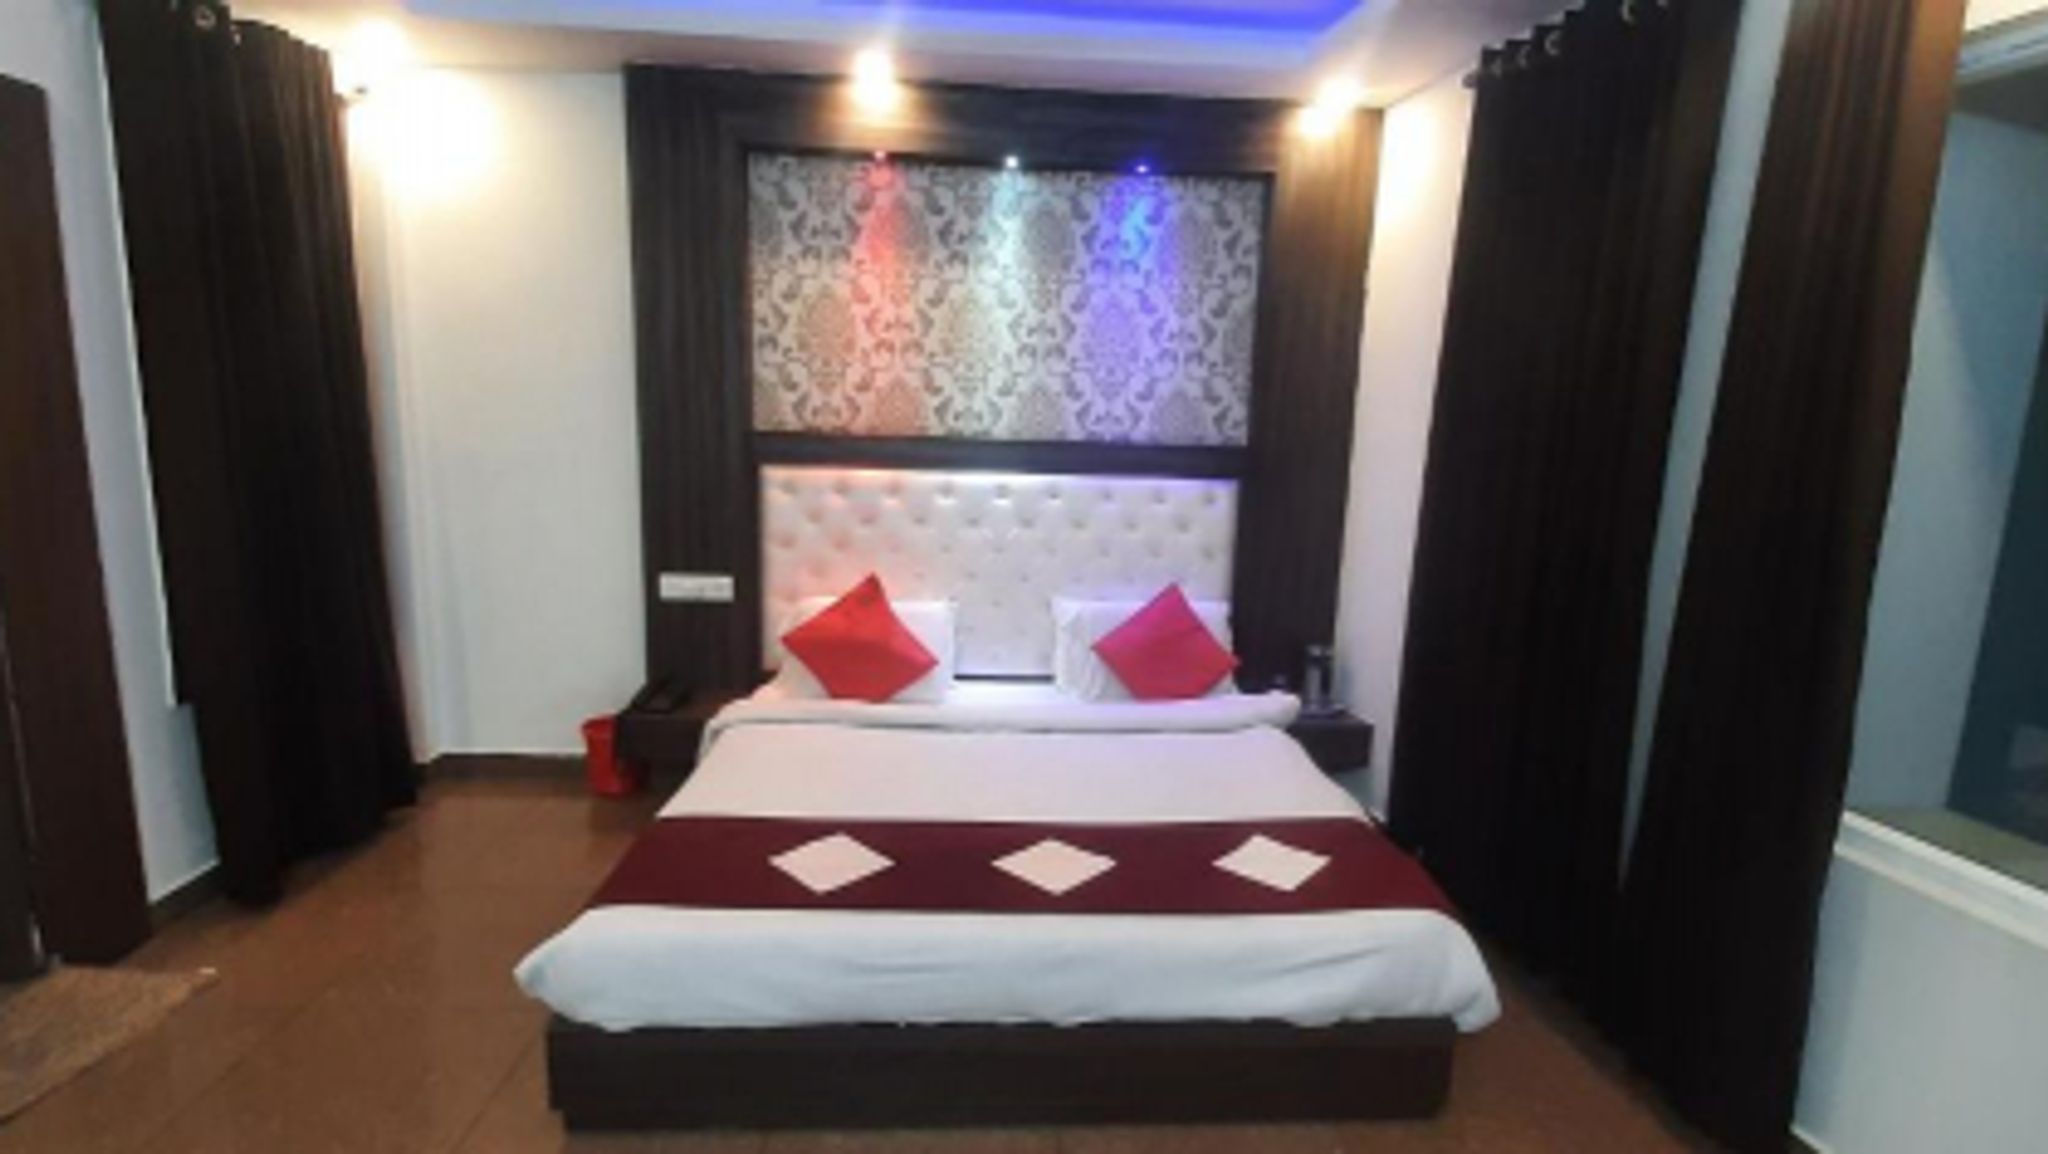 Deluxe Double Bed AC Room